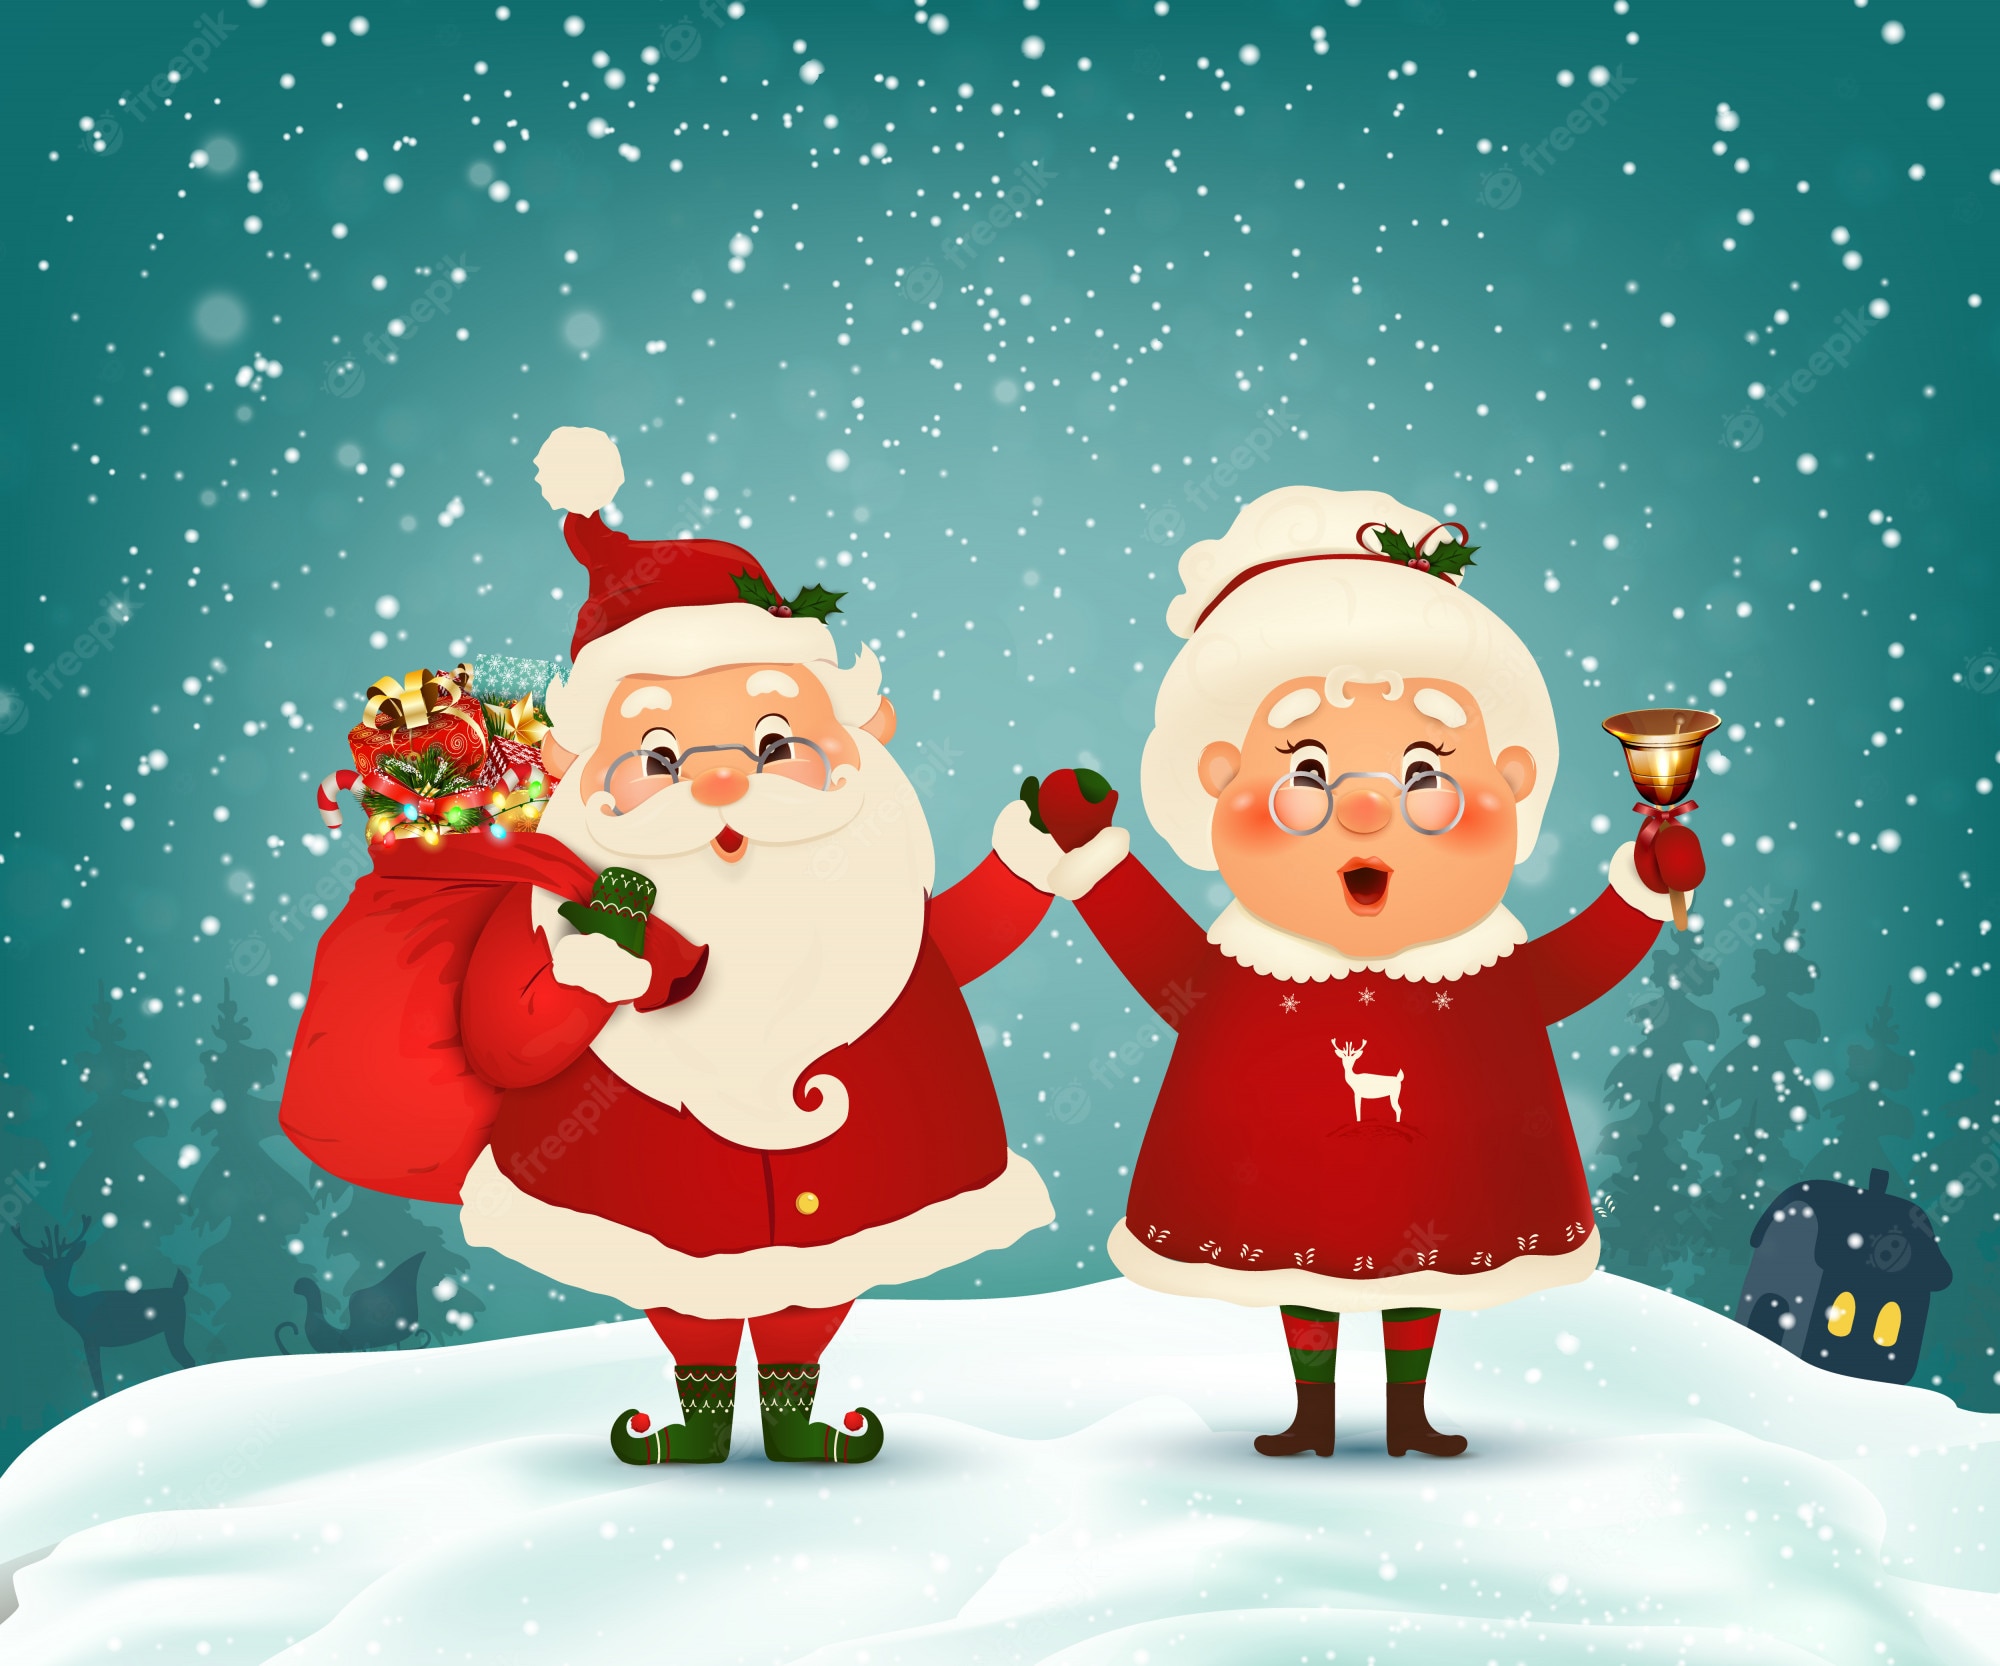 Premium Vector. Merry christmas with santa claus and mrs claus, snowy illustation